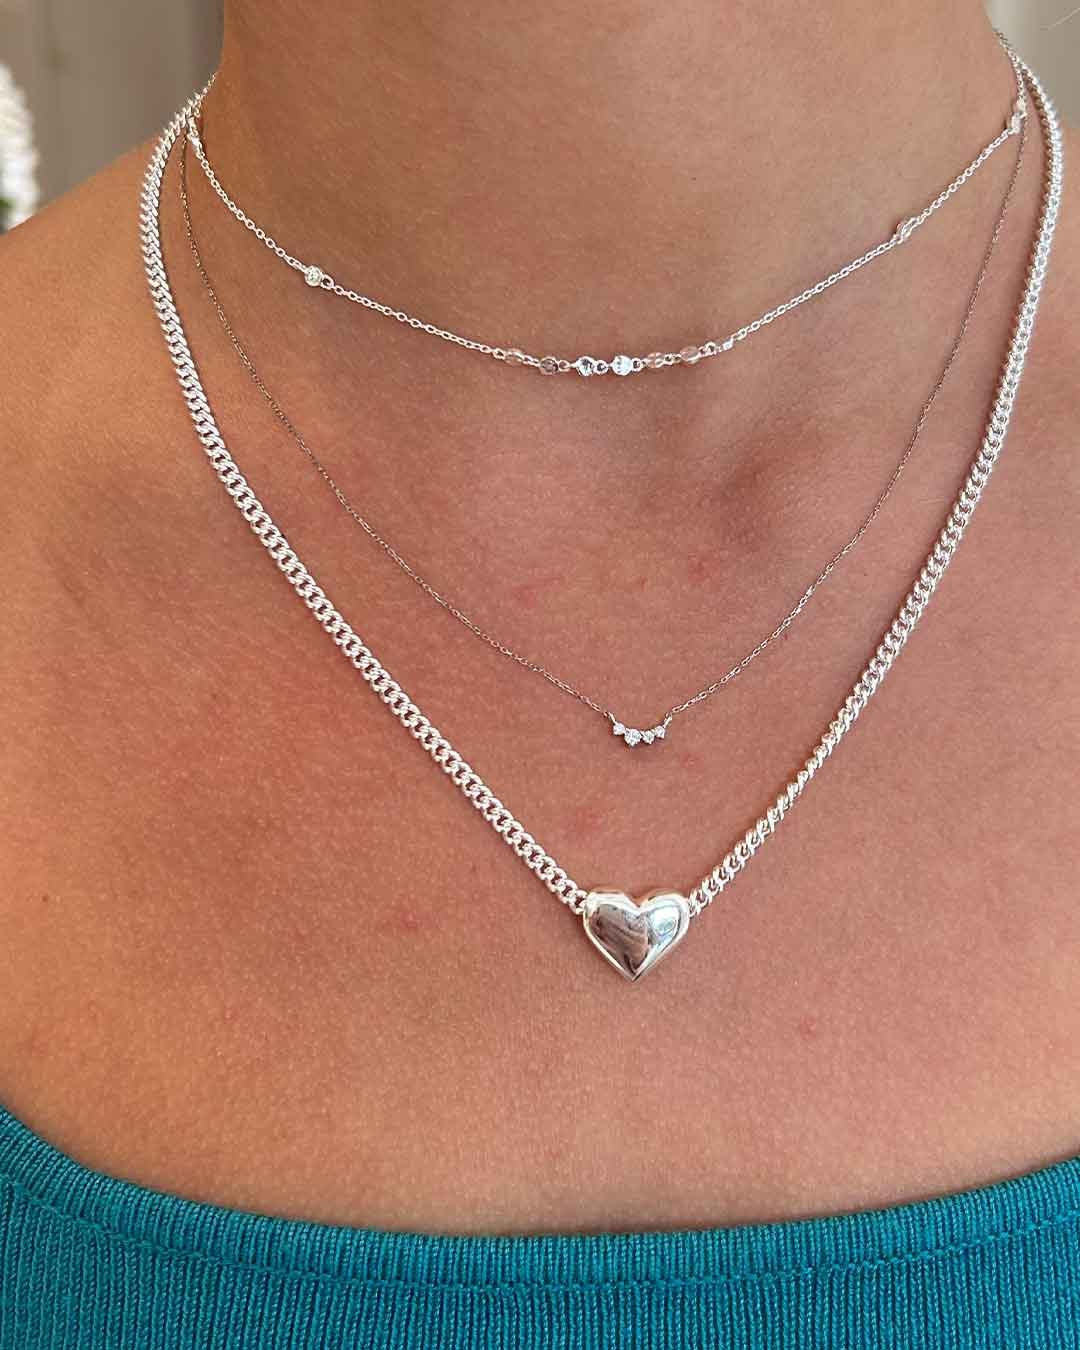 Woman wearing silver plated and white gold necklaces.